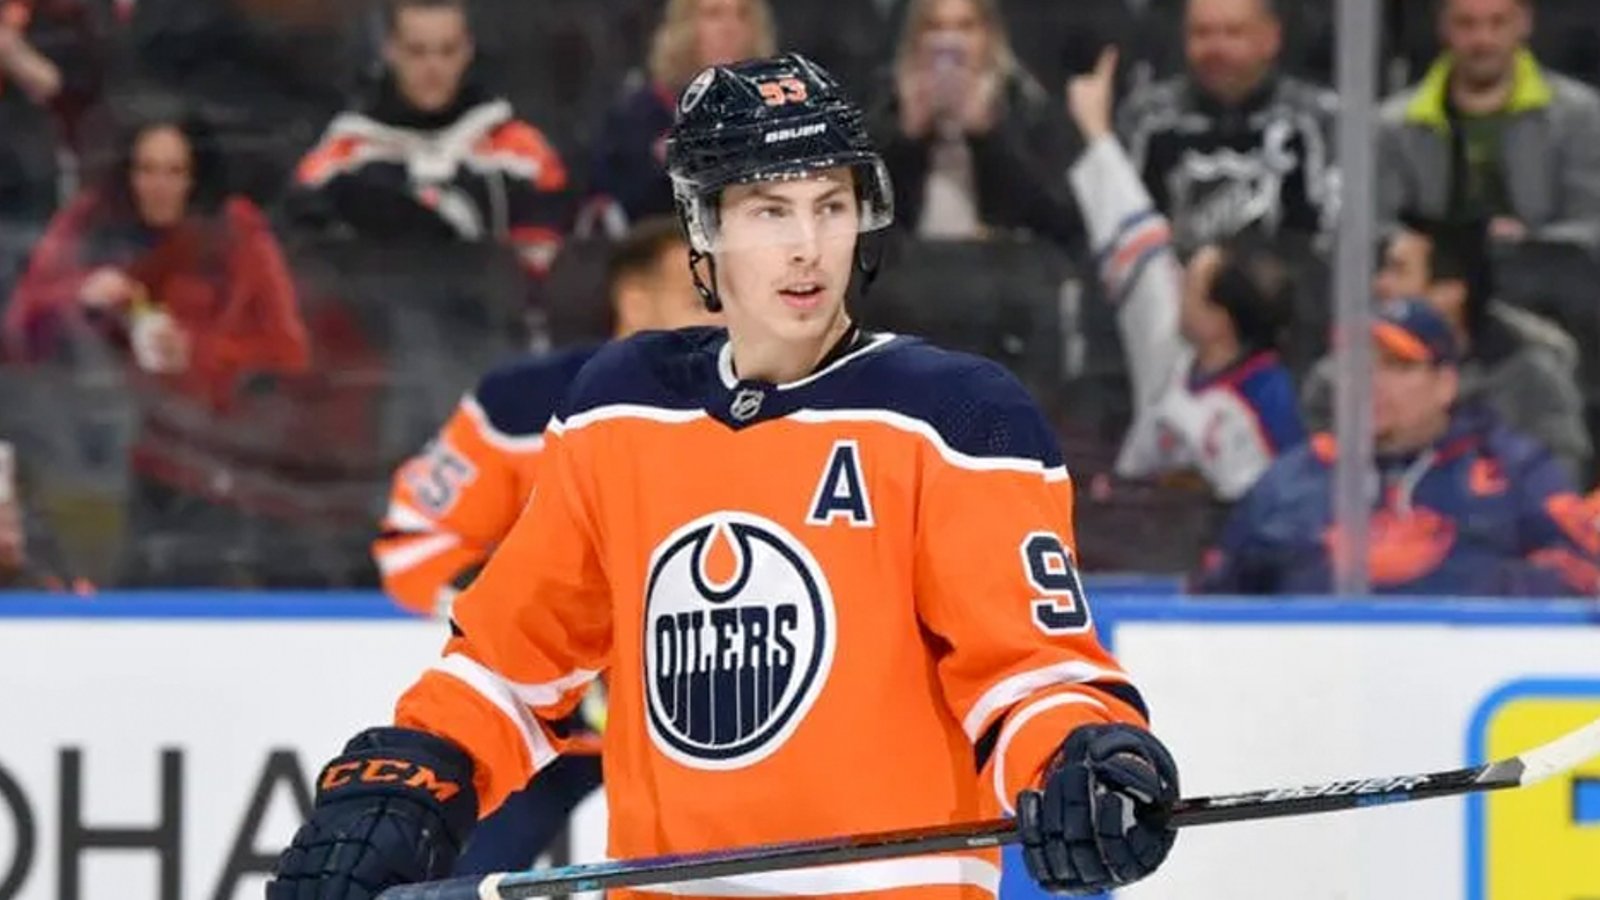 Report: Nugent-Hopkins set to sign $40 million deal with the Oilers